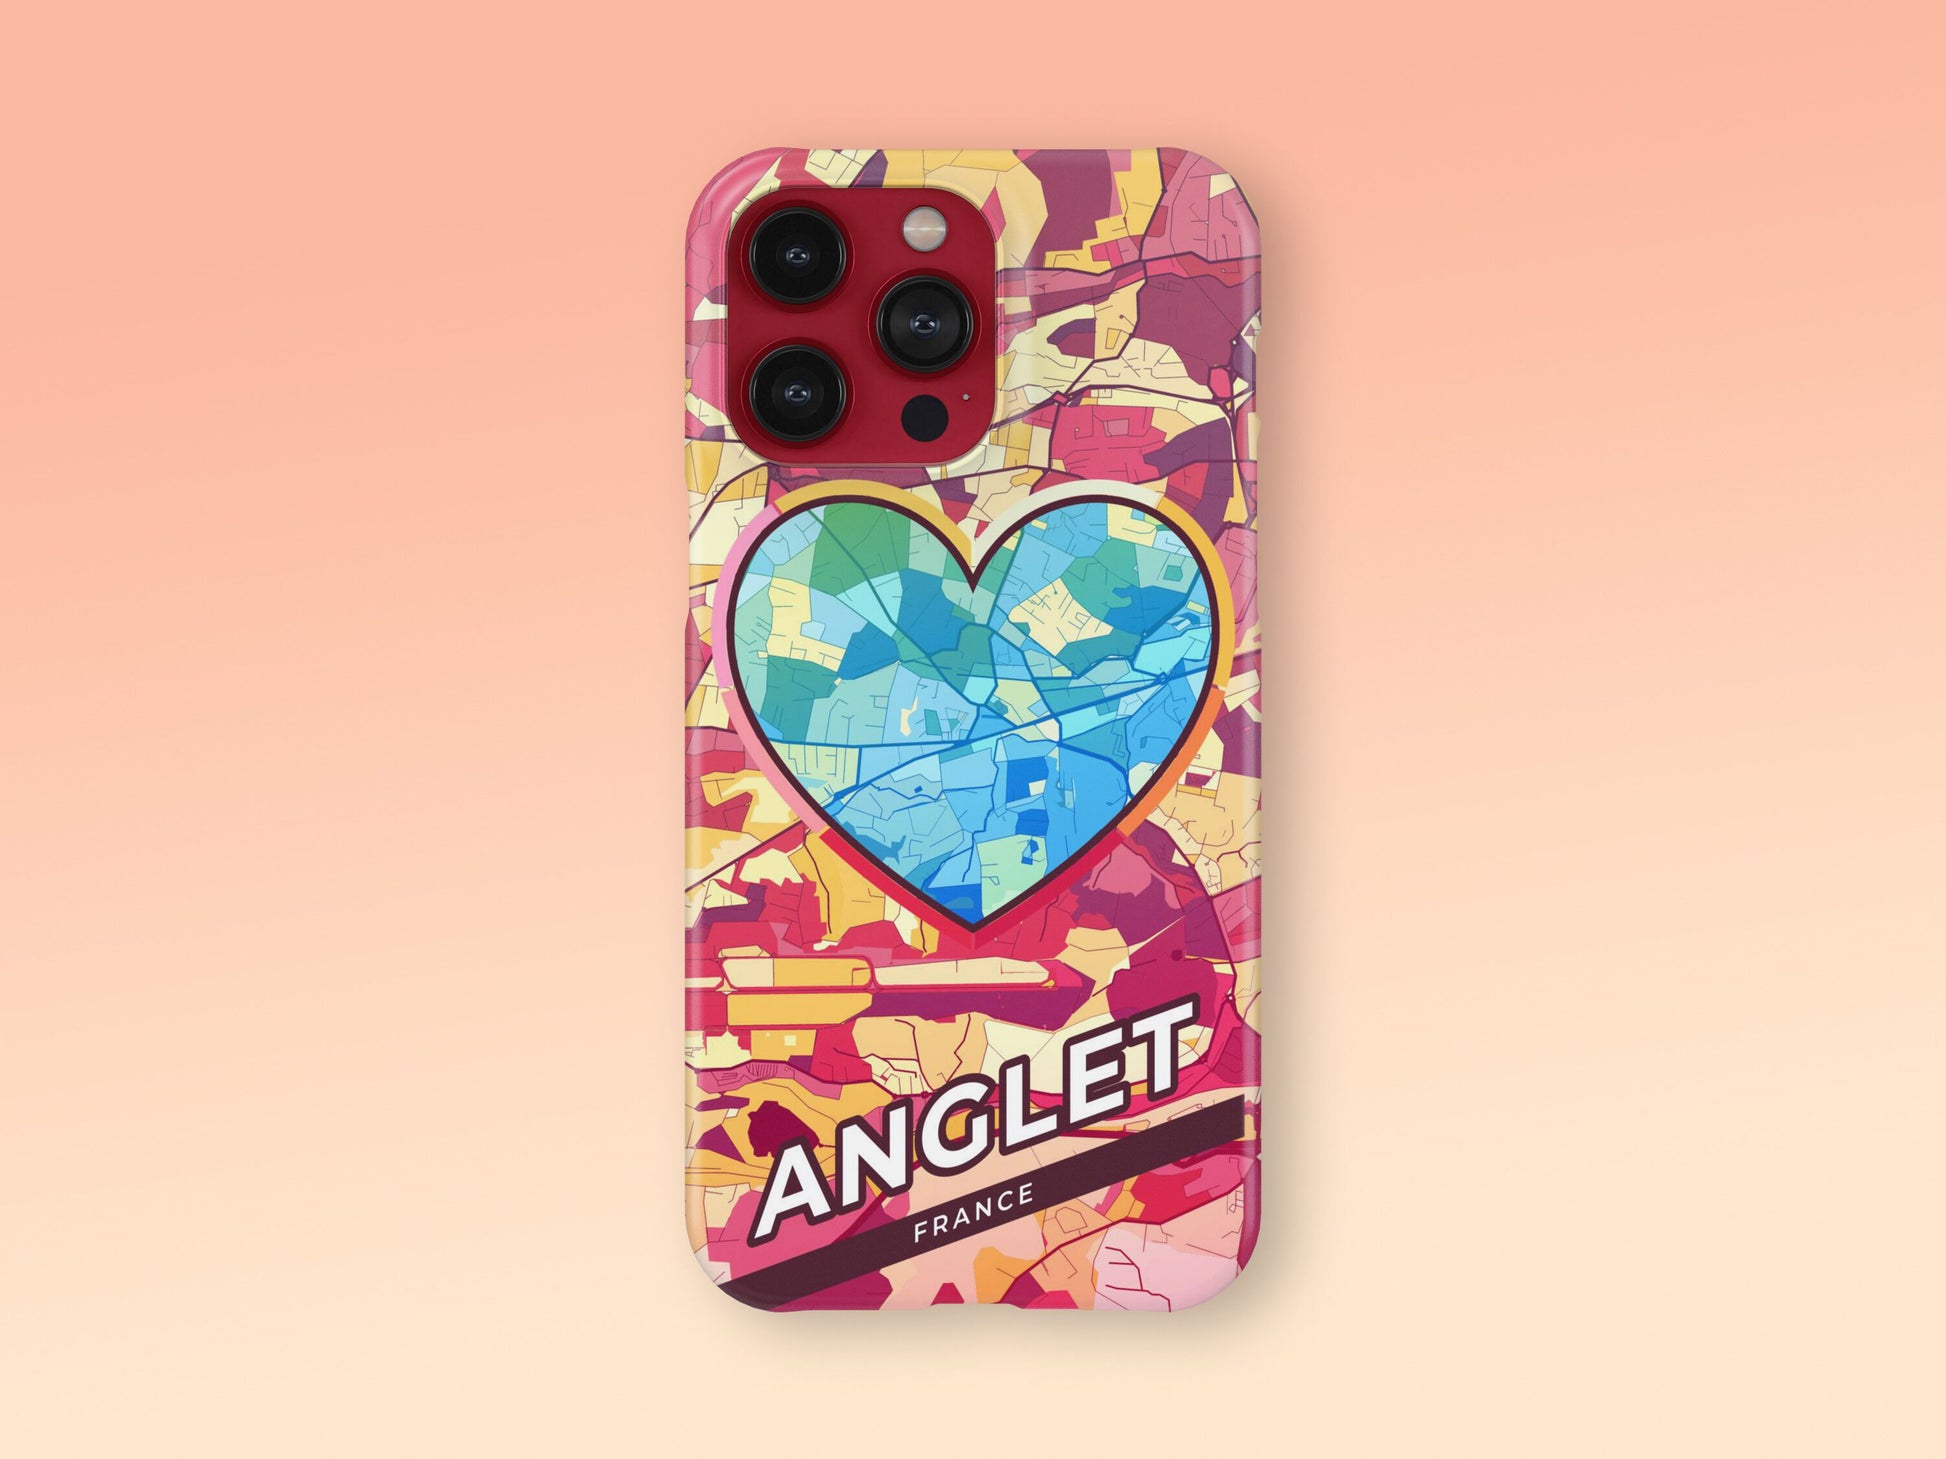 Anglet France slim phone case with colorful icon. Birthday, wedding or housewarming gift. Couple match cases. 2